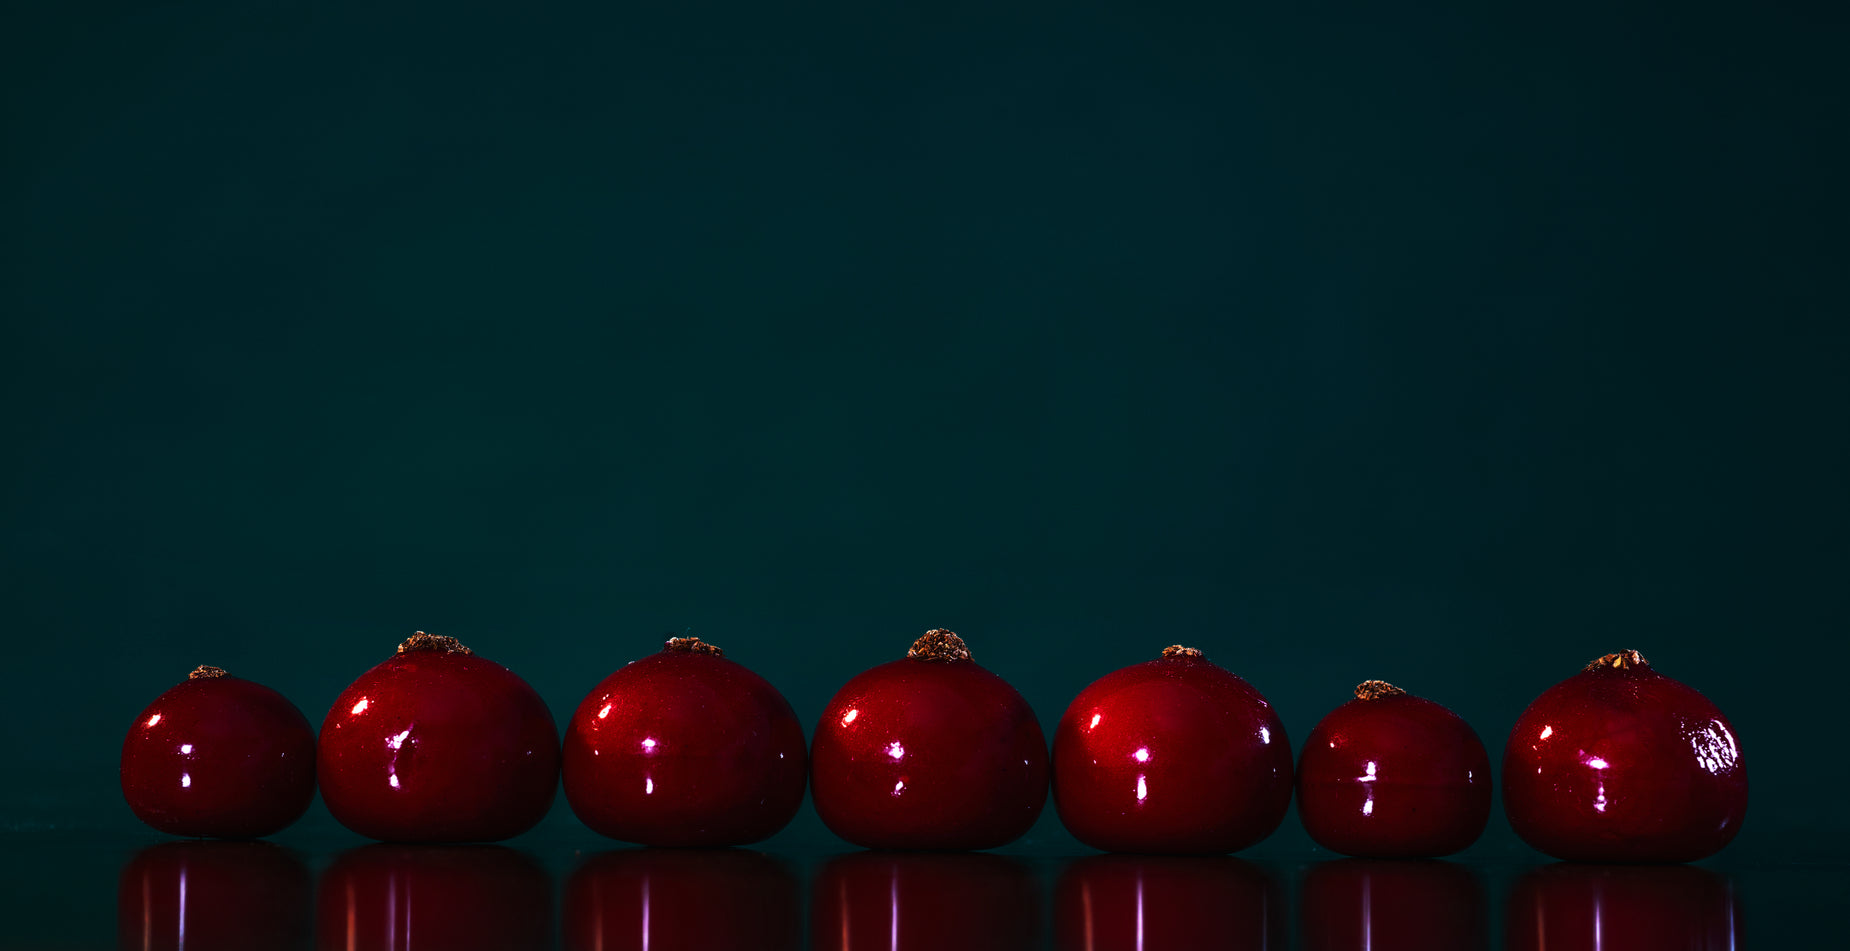 a group of red apples lined up in a row